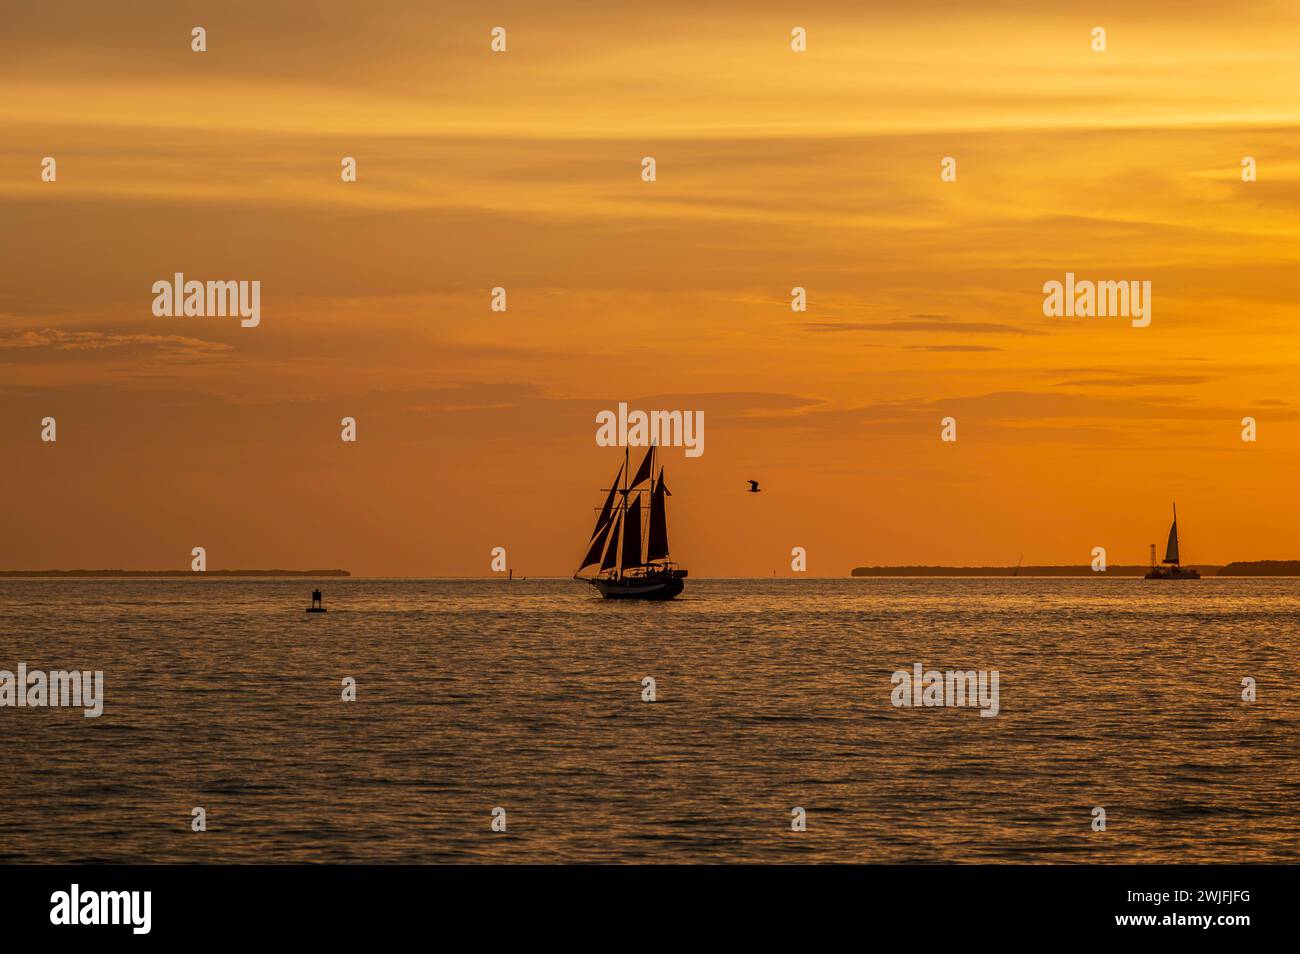 A spectacular sunset, off the coast of Key West, Florida, with sailing boats silhoutted against the orange sky Stock Photo